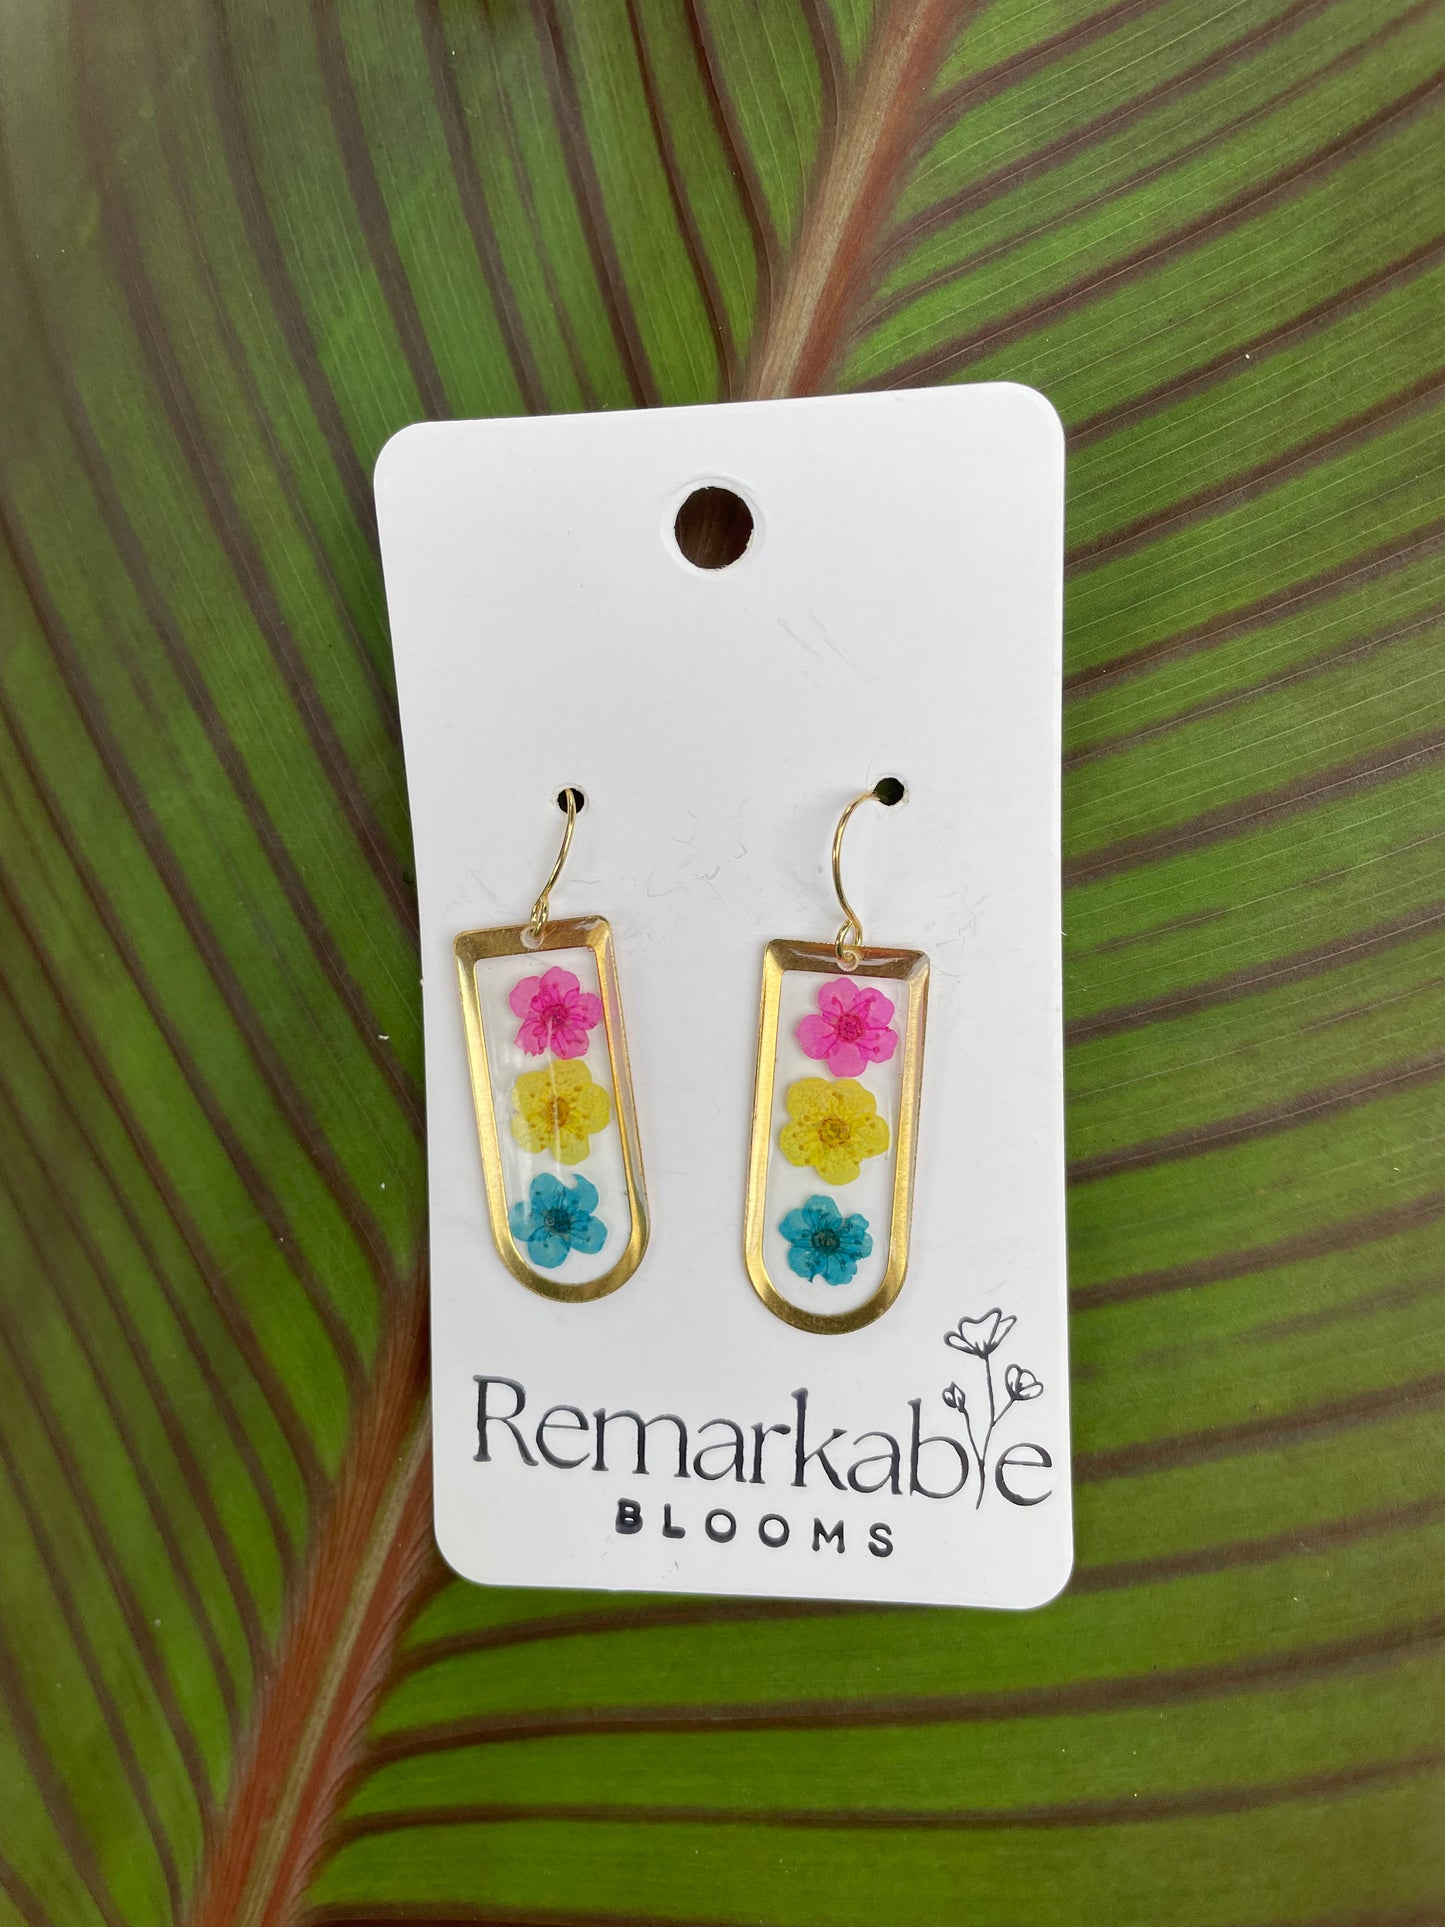 Handmade pink, yellow, and blue Real Pressed Flower Earrings. 14K White and Yellow Gold plated. Pride Earrings.